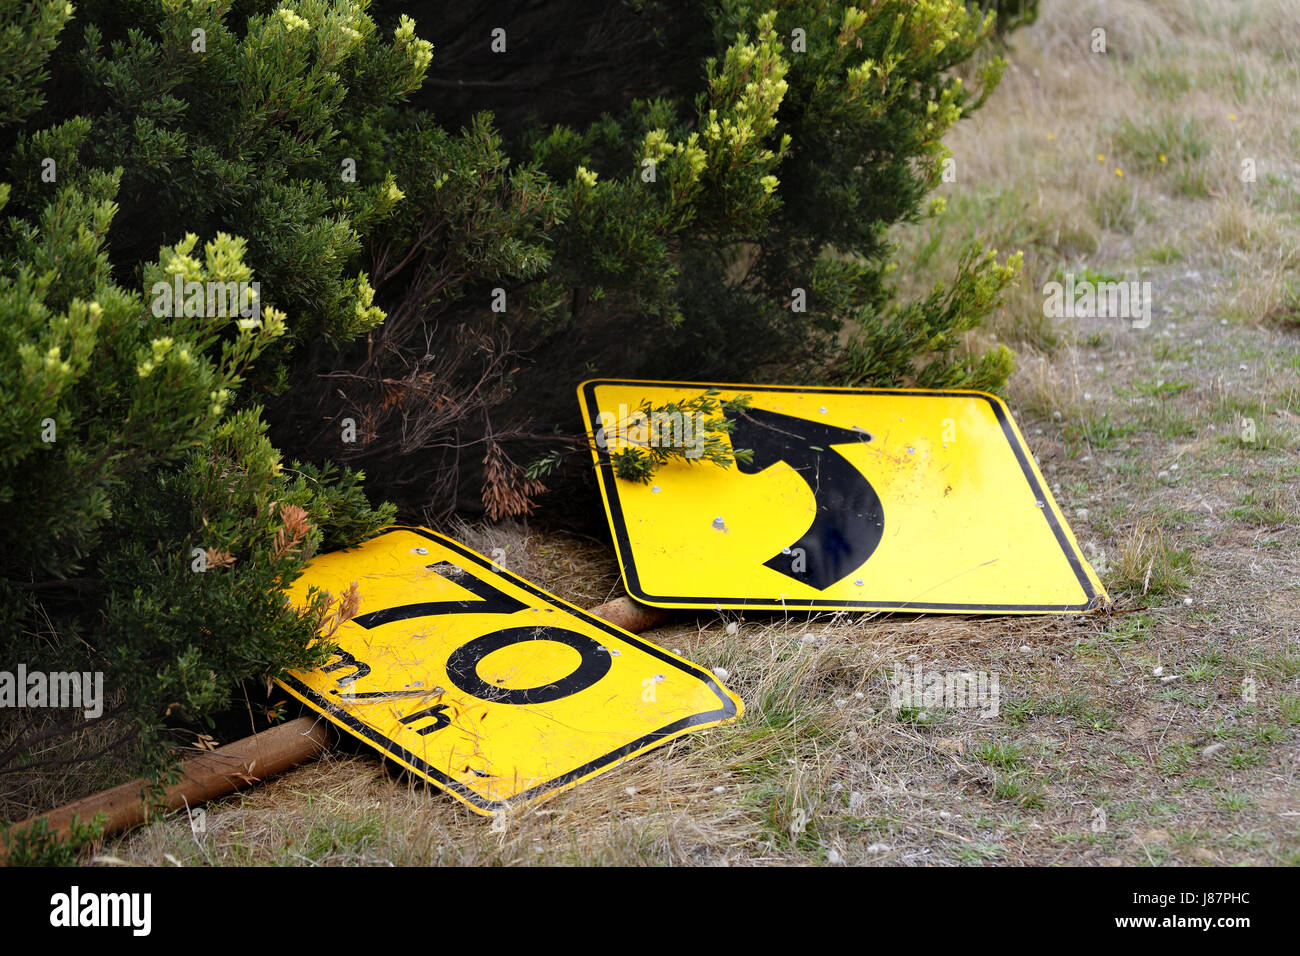 Did someone turn too soon?  A 70 km/h sign at the side of the Great Ocean Road, Victoria, Australia Stock Photo